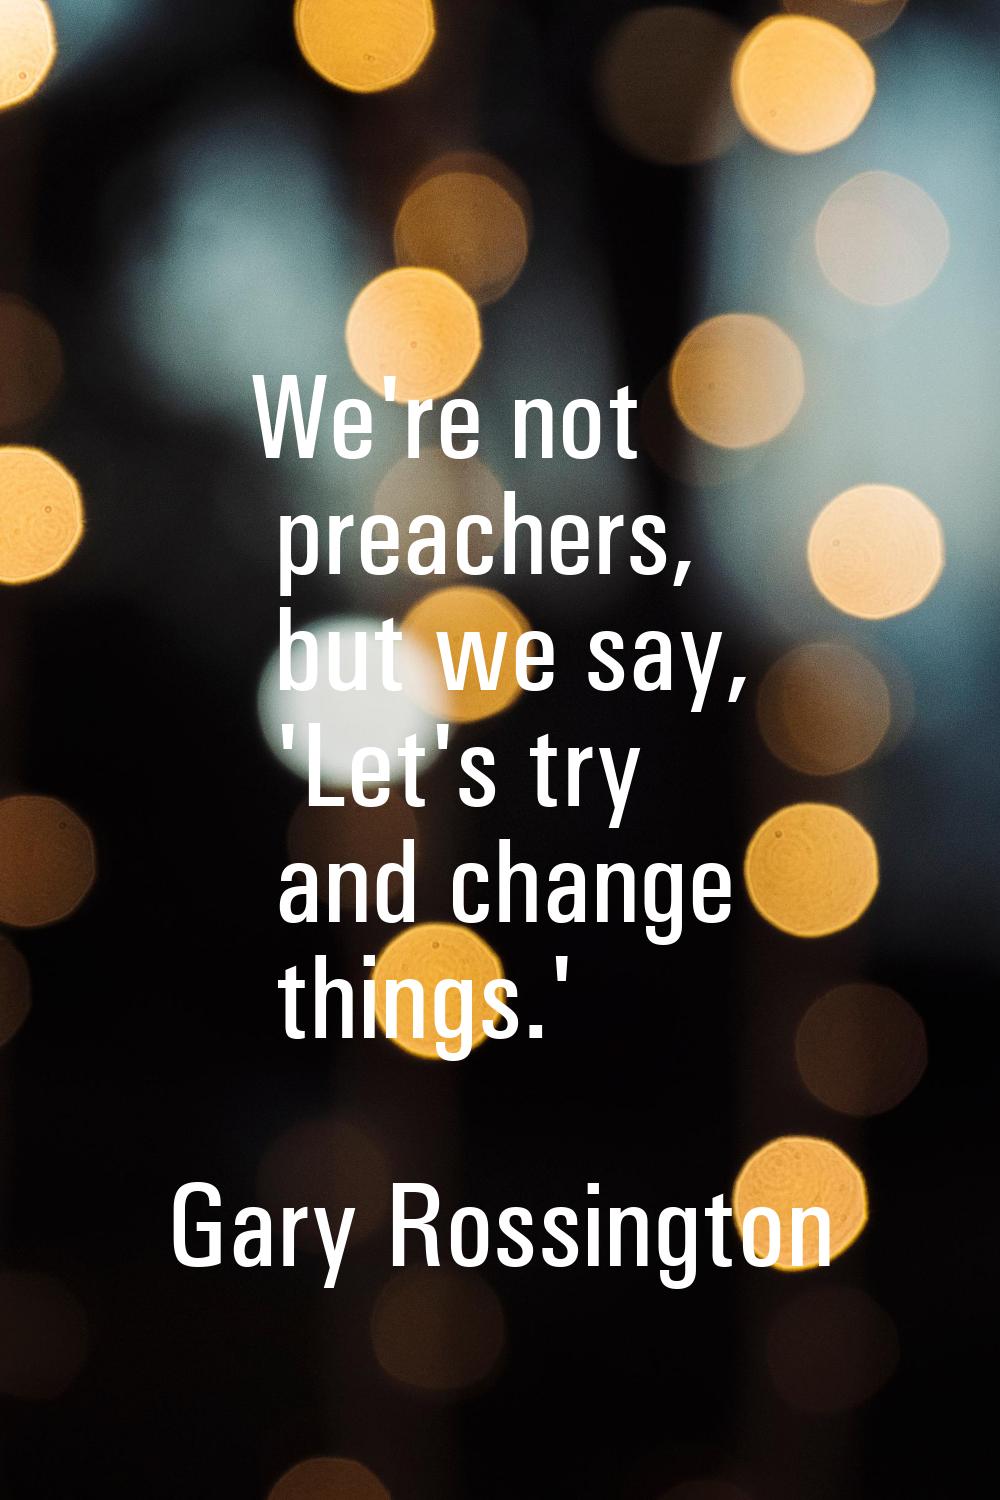 We're not preachers, but we say, 'Let's try and change things.'